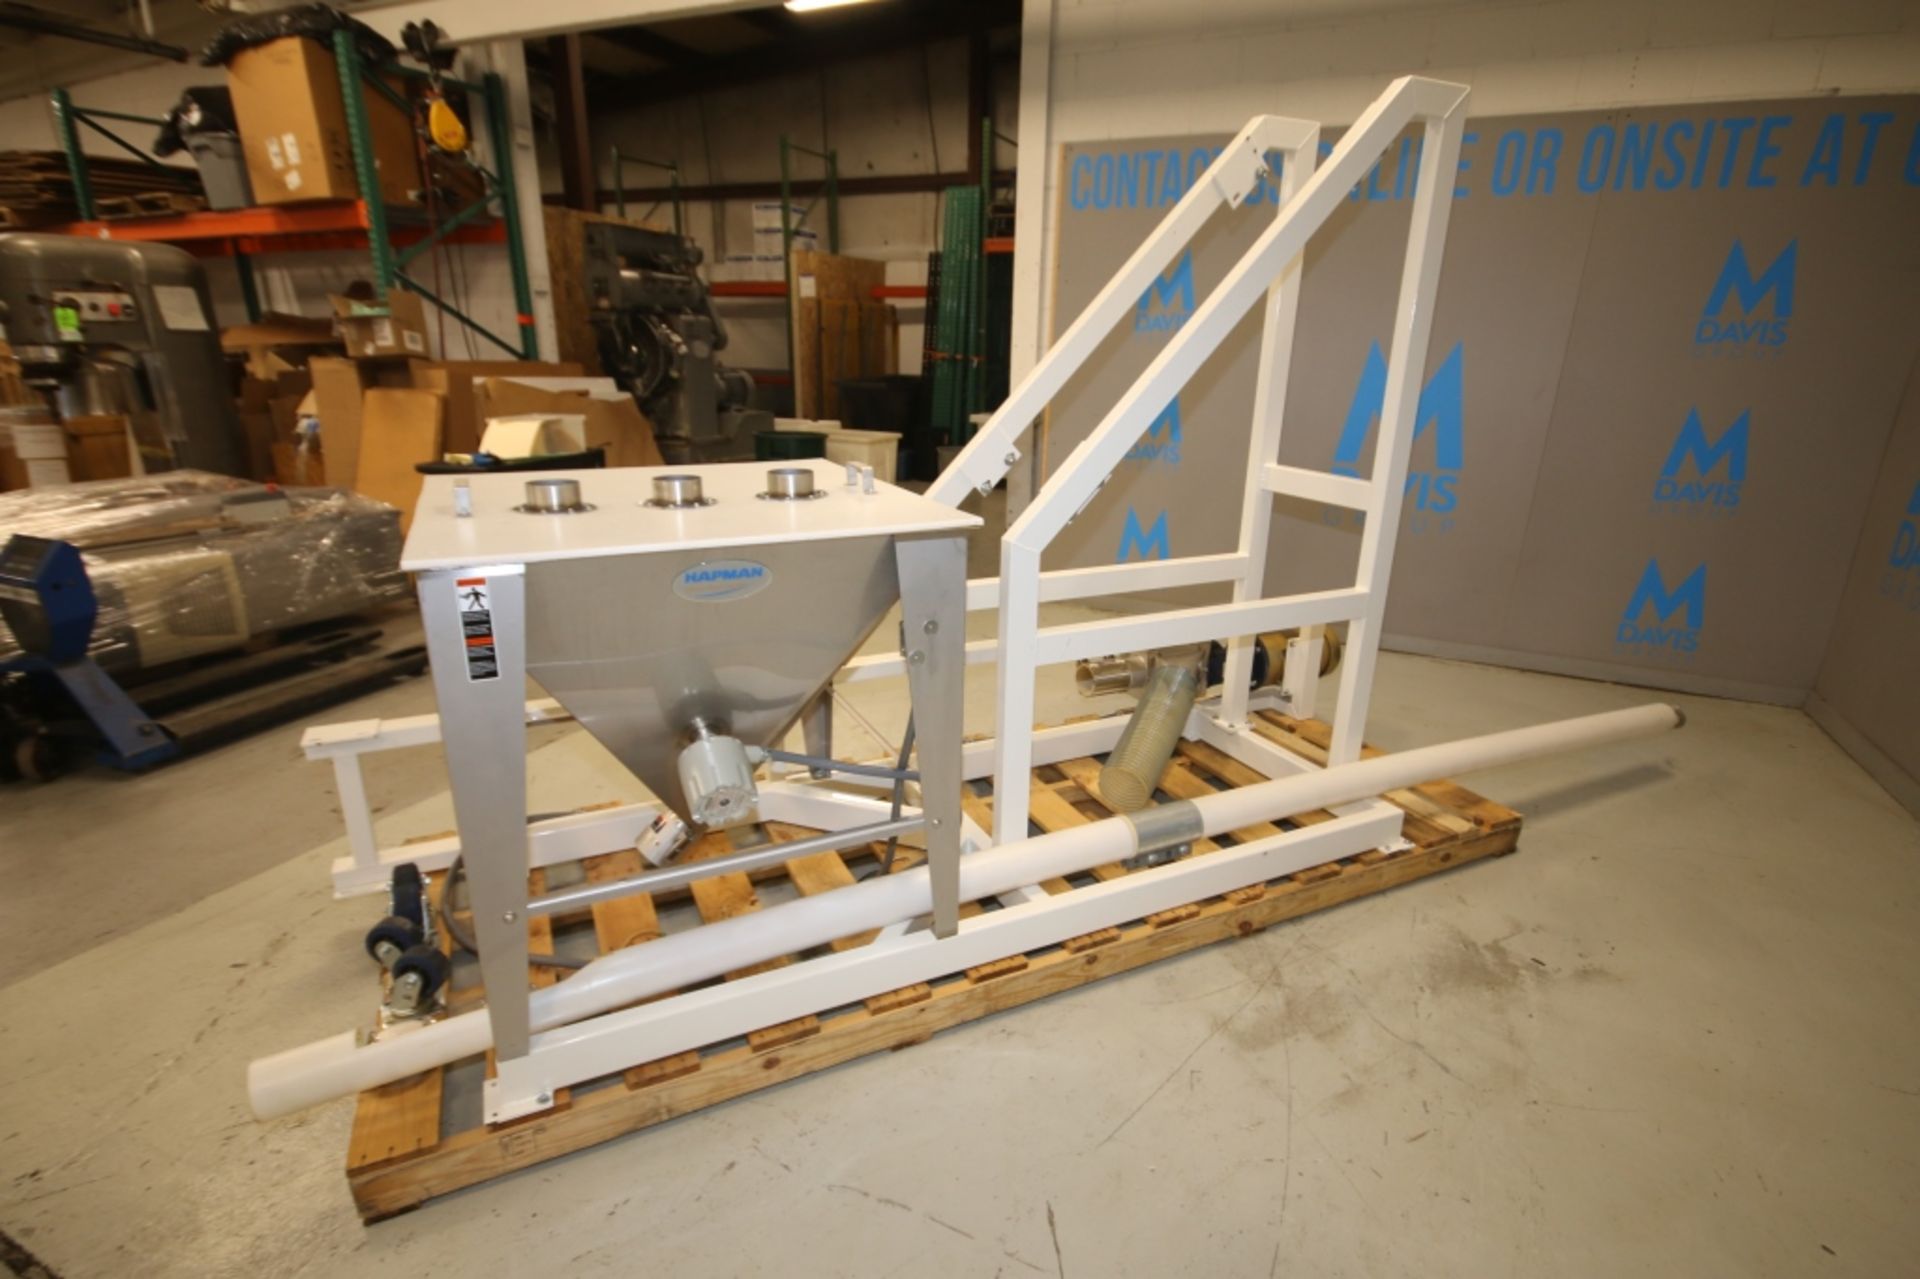 Hapman Powder Auger Conveyor System, Includes38" W x 38" L x 41" H S/S Hopper SN X 1410700, with 5 - Image 4 of 7